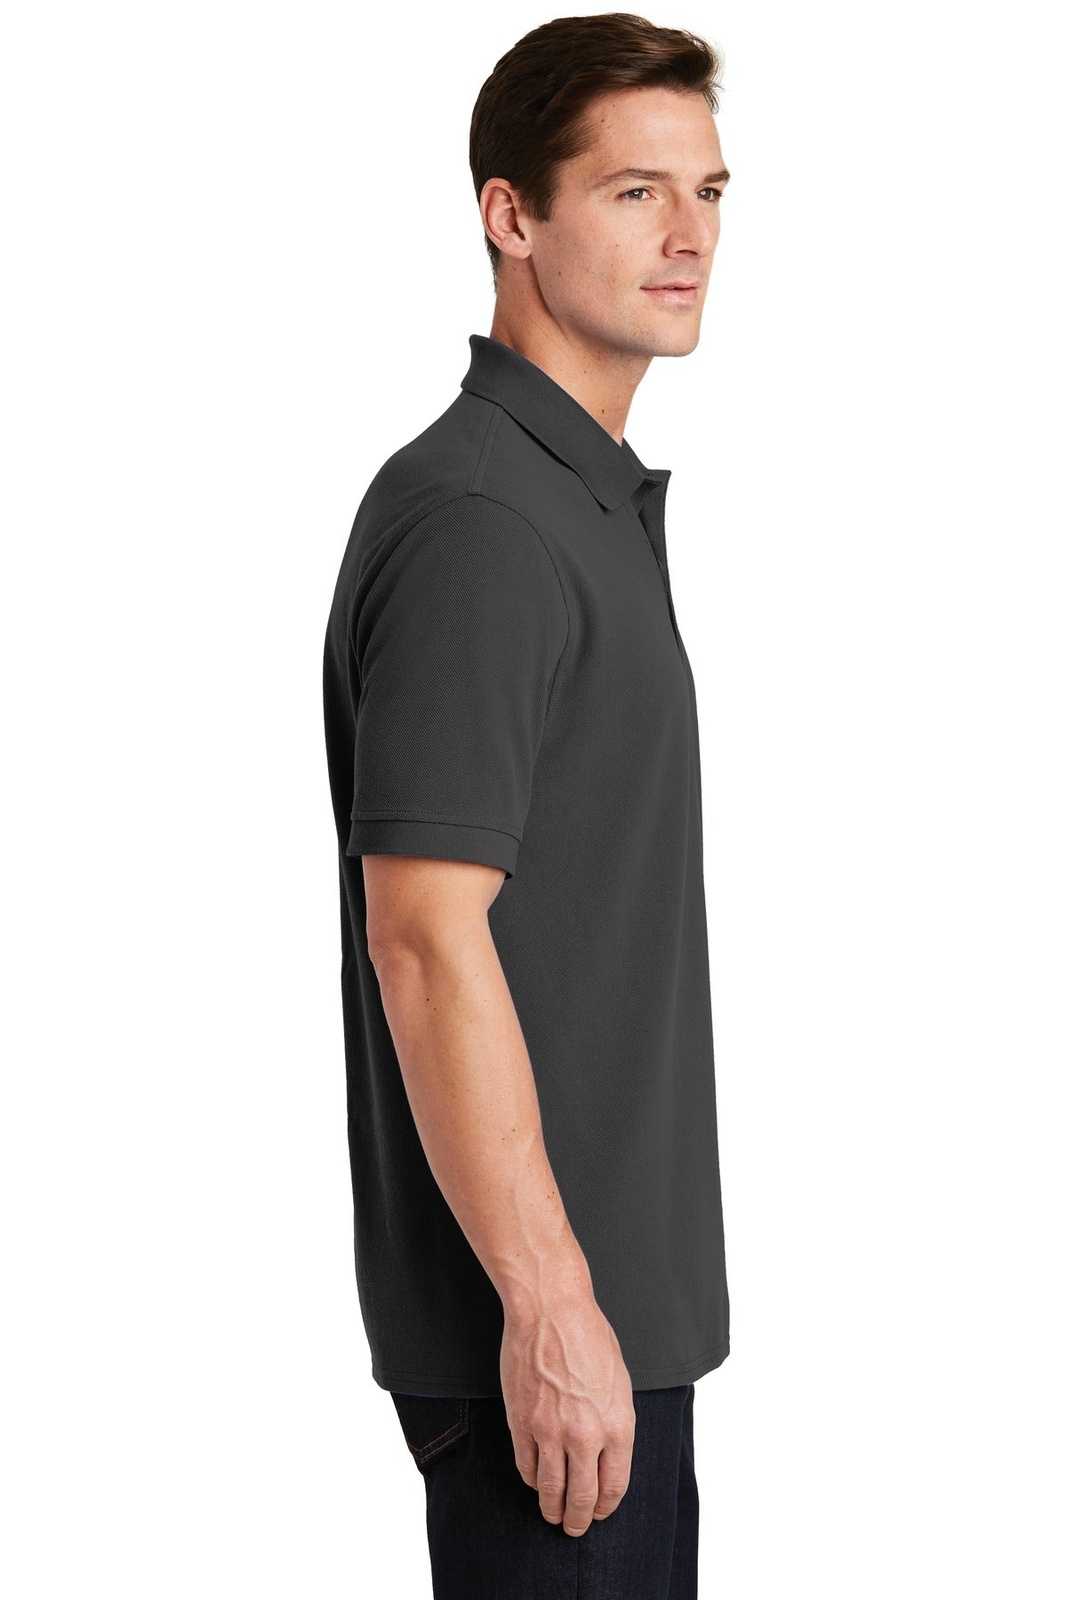 Port &amp; Company KP1500 Combed Ring Spun Pique Polo - Charcoal - HIT a Double - 3